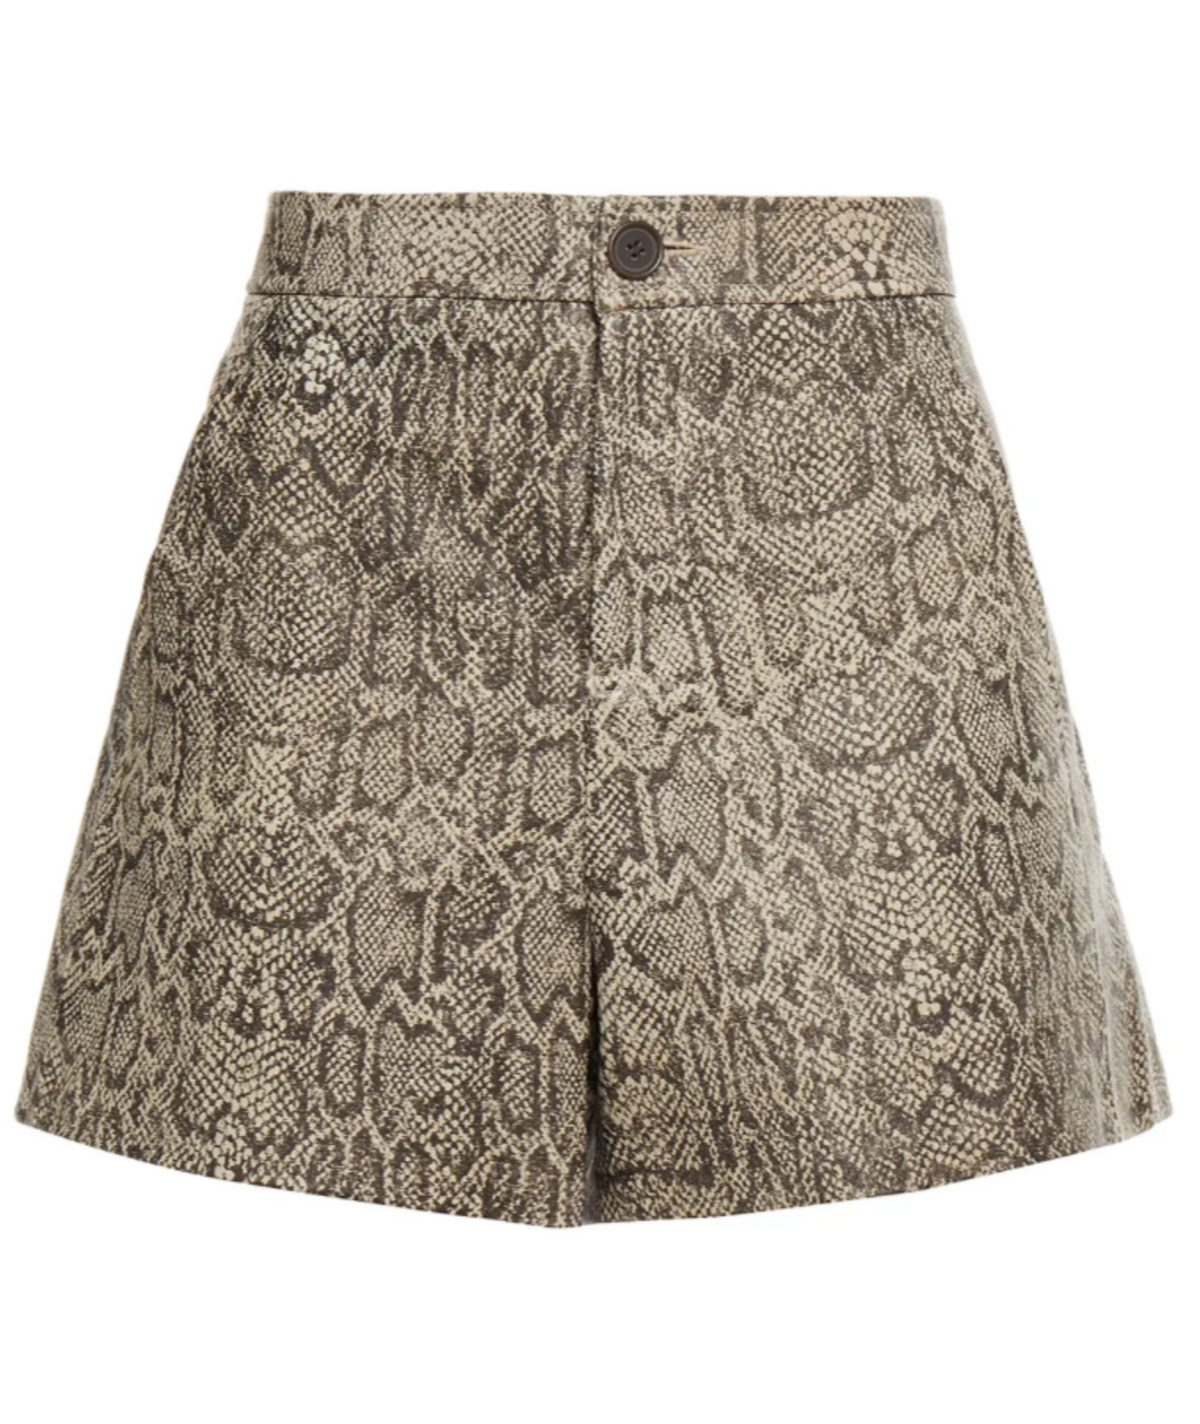 Abreal Snake Print Leather Shorts